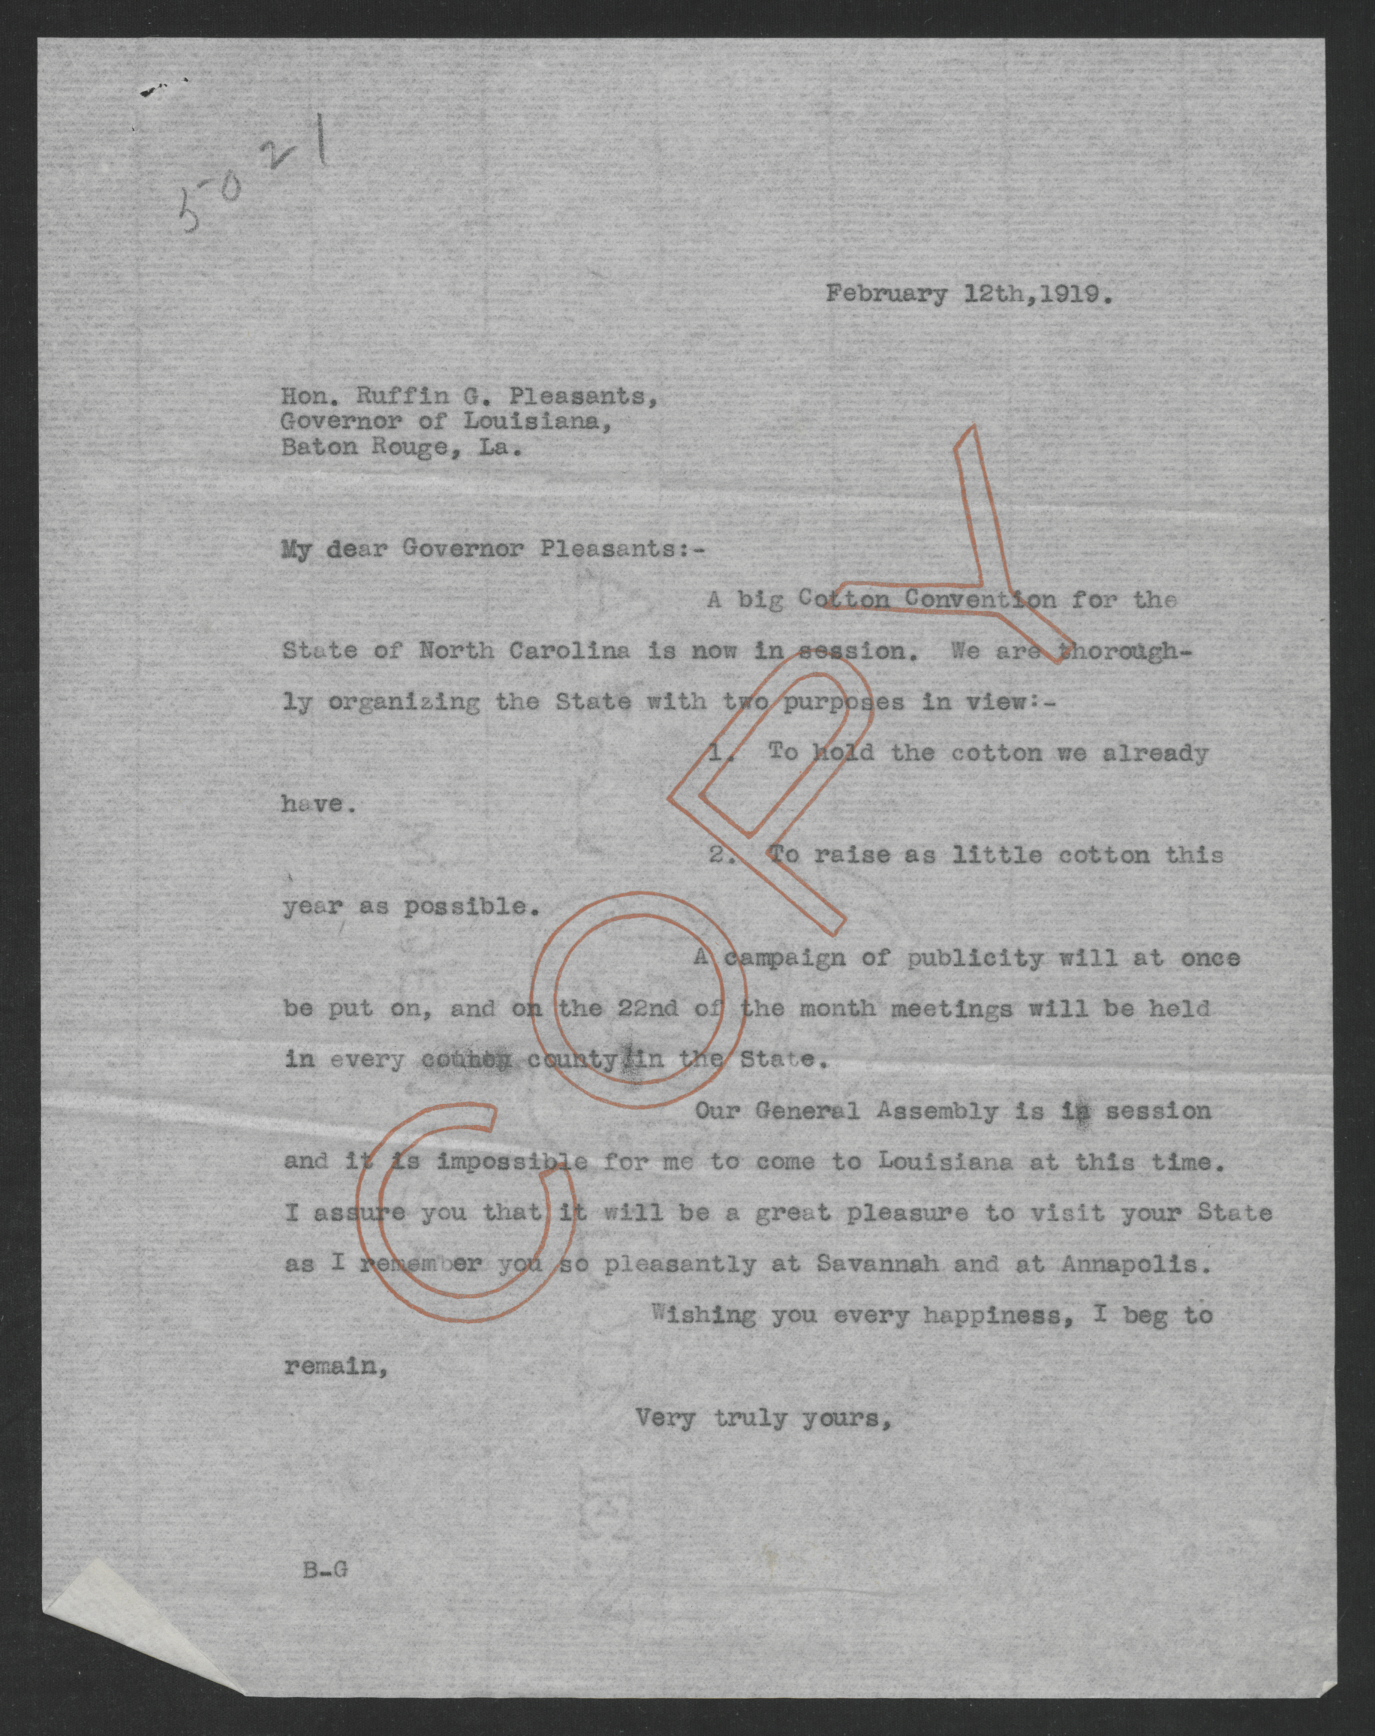 Letter from Thomas W. Bickett to Ruffin G. Pleasant, February 12, 1919